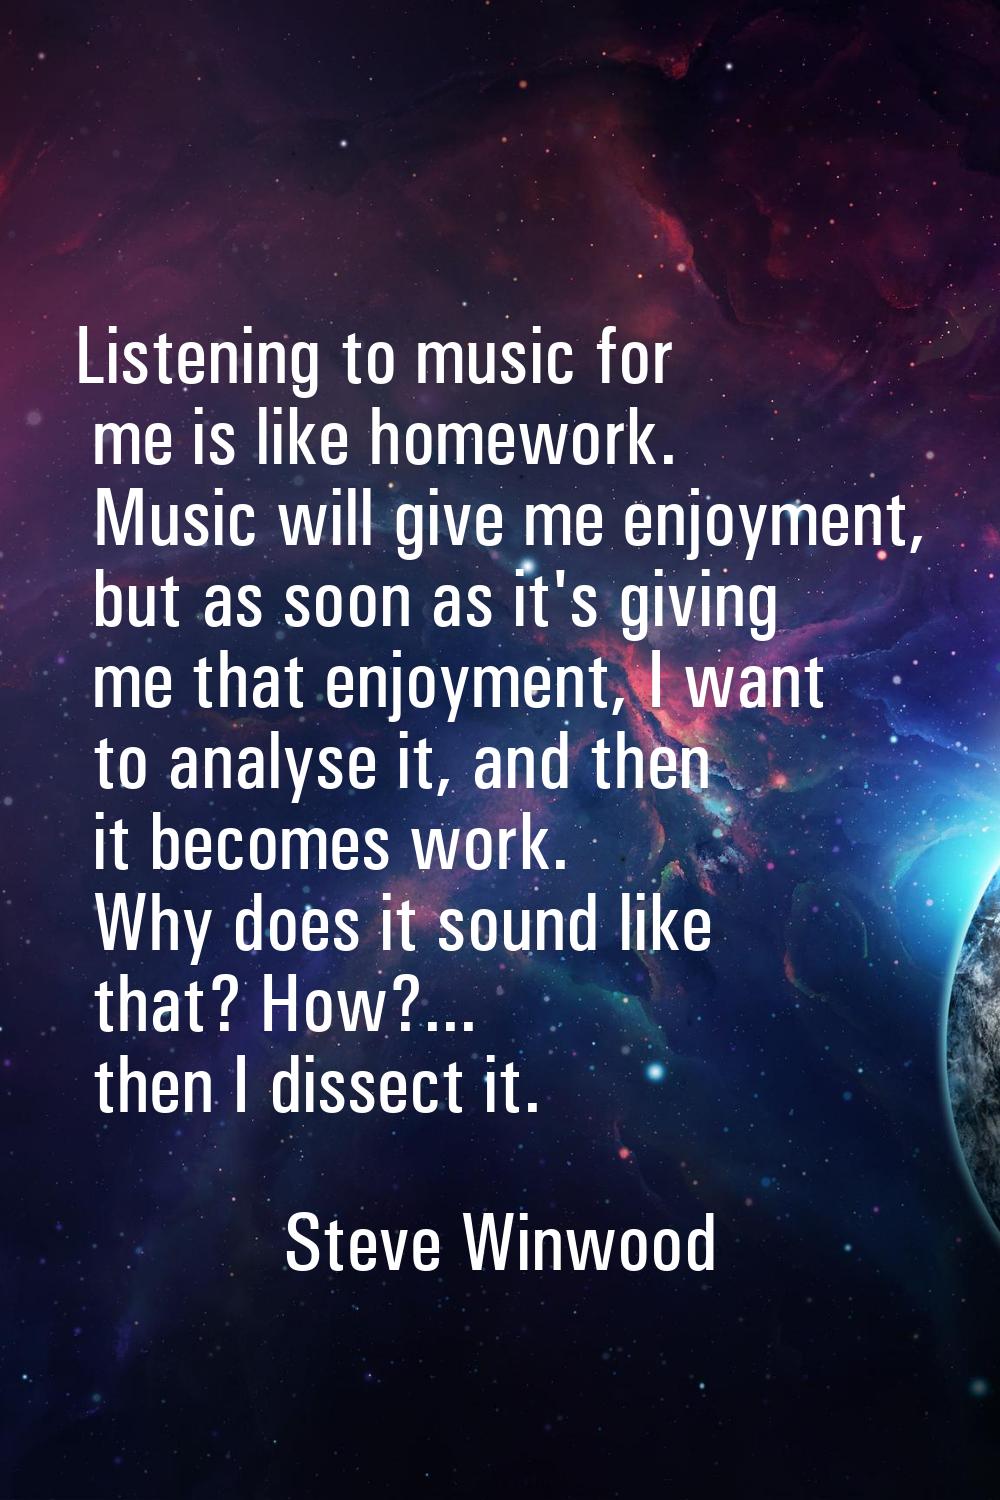 Listening to music for me is like homework. Music will give me enjoyment, but as soon as it's givin